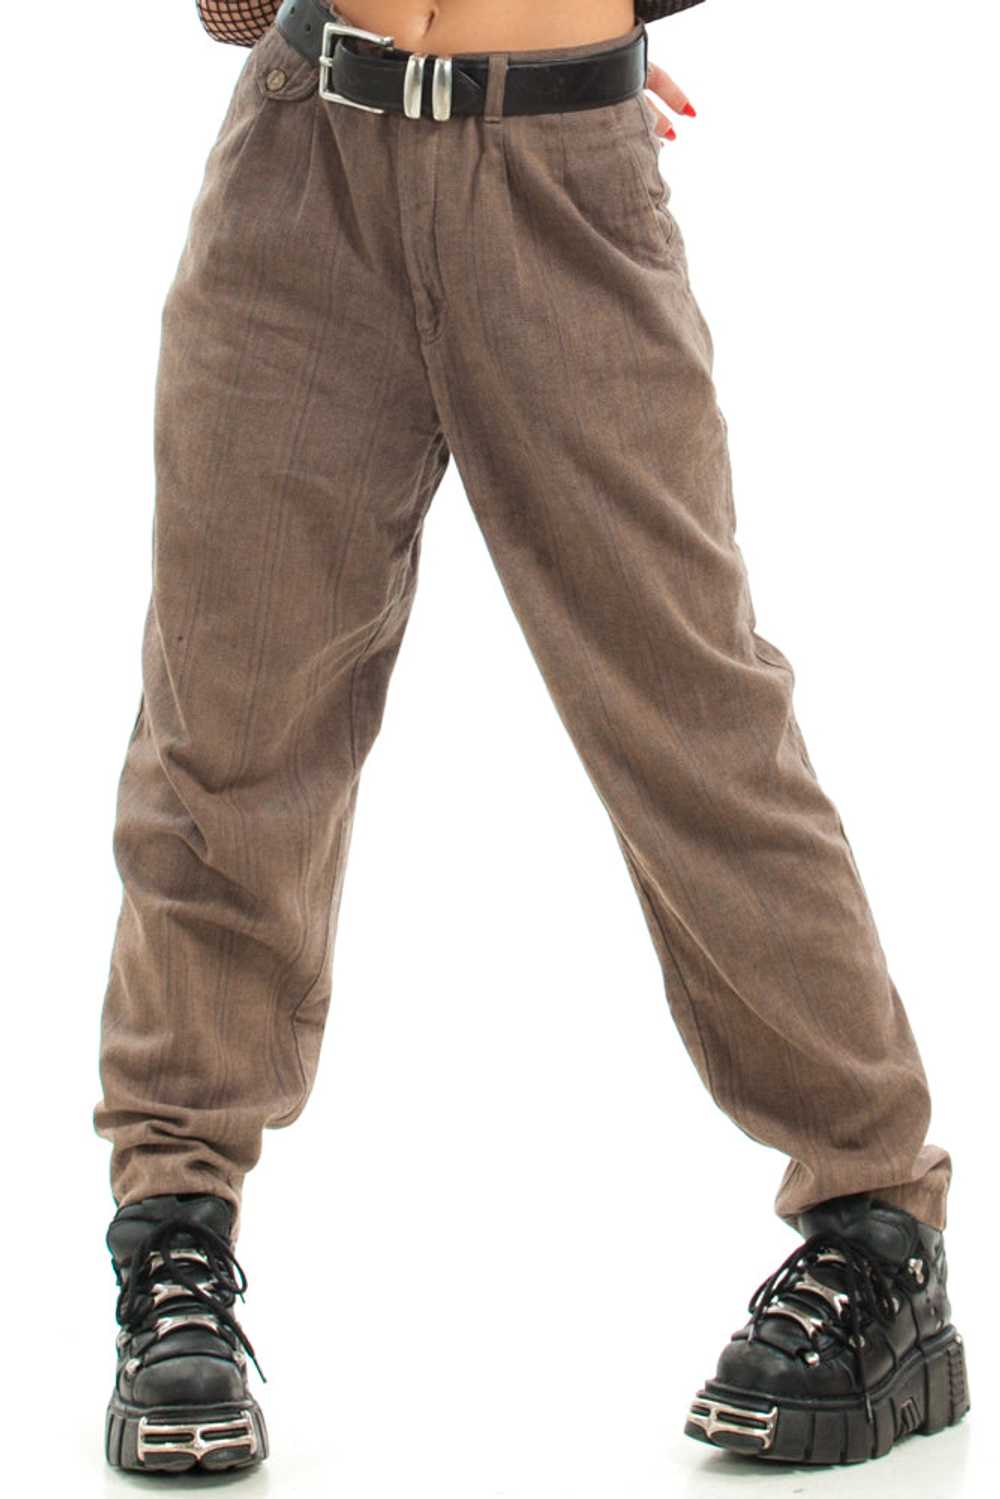 Classic Vintage Trousers - image 2